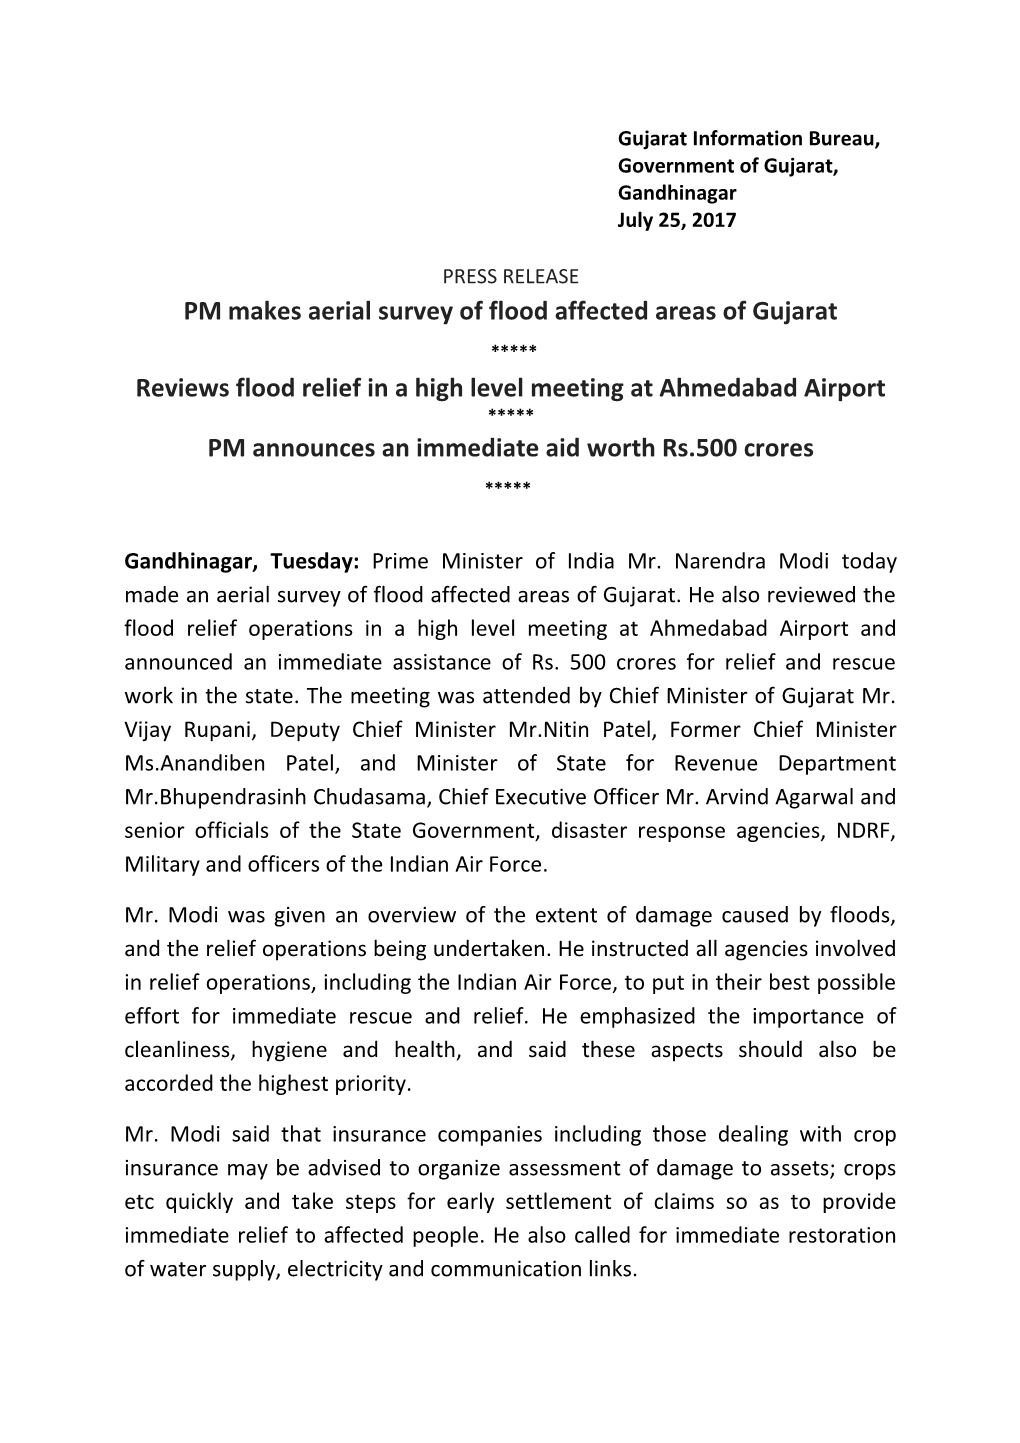 Pmmakes Aerial Survey of Flood Affected Areas of Gujarat